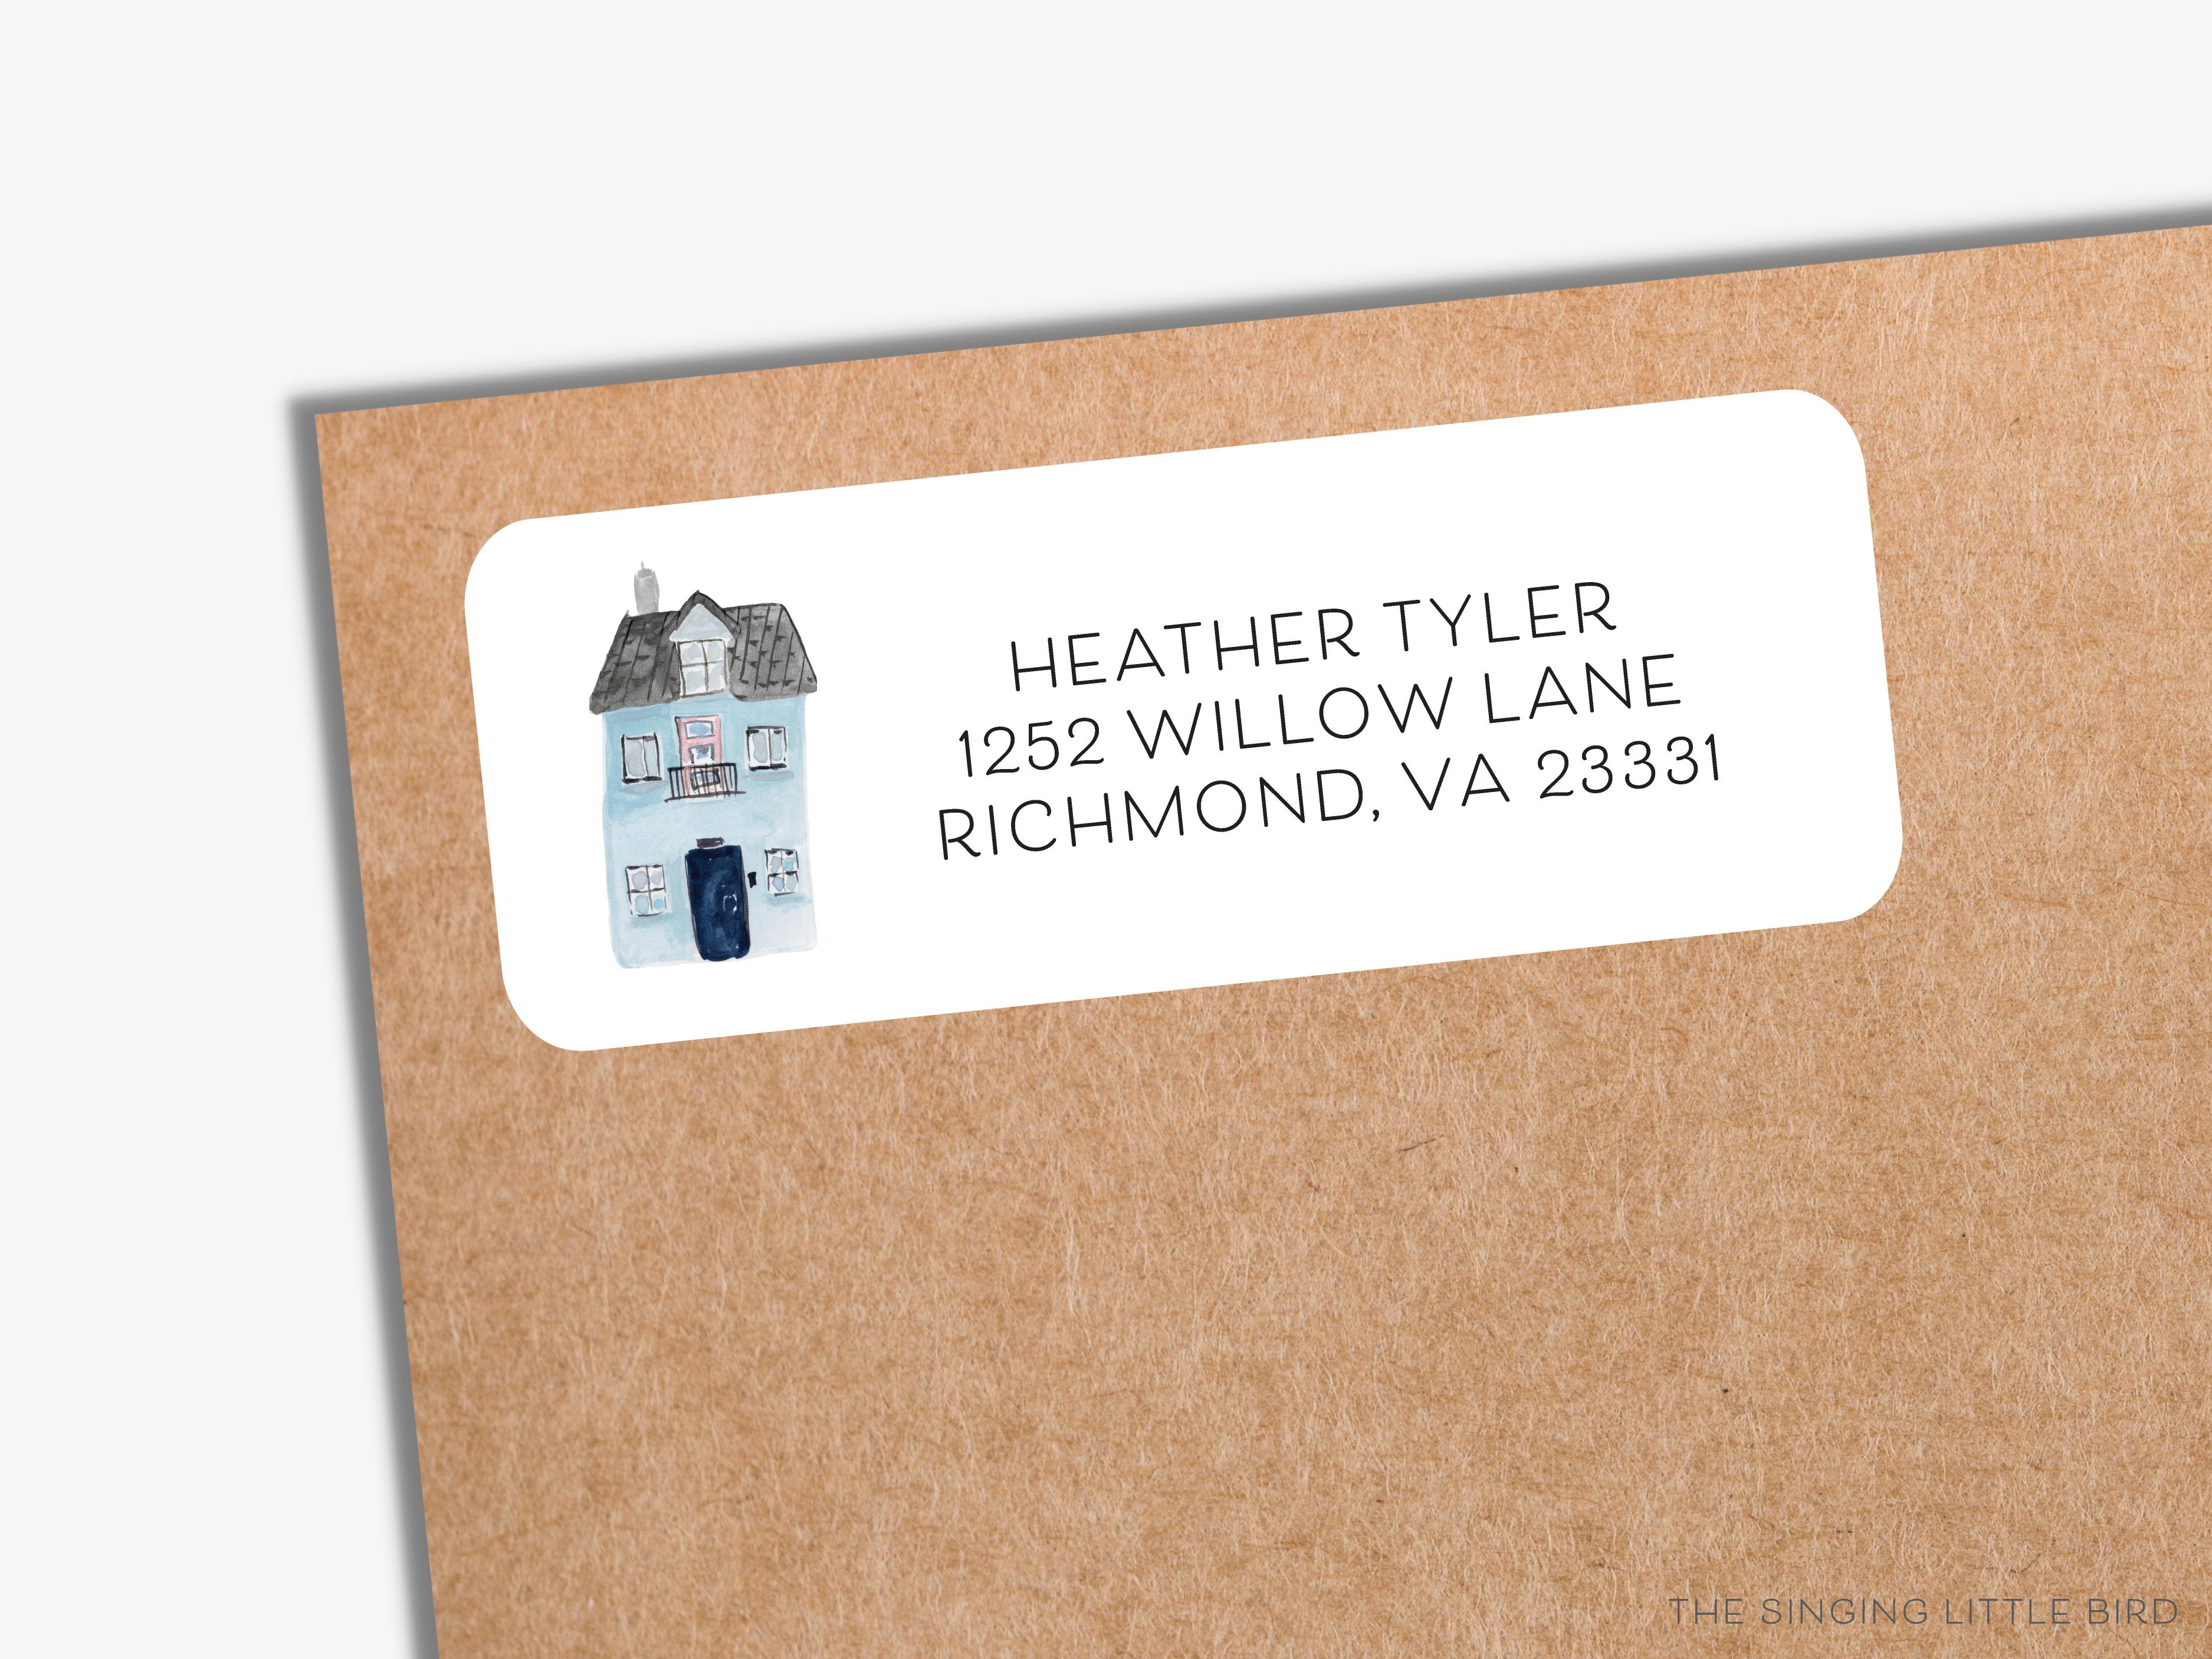 Realtor Return Address Labels-These personalized return address labels are 2.625" x 1" and feature our hand-painted watercolor House, printed in the USA on beautiful matte finish labels. These make great gifts for yourself or the residential lover.-The Singing Little Bird